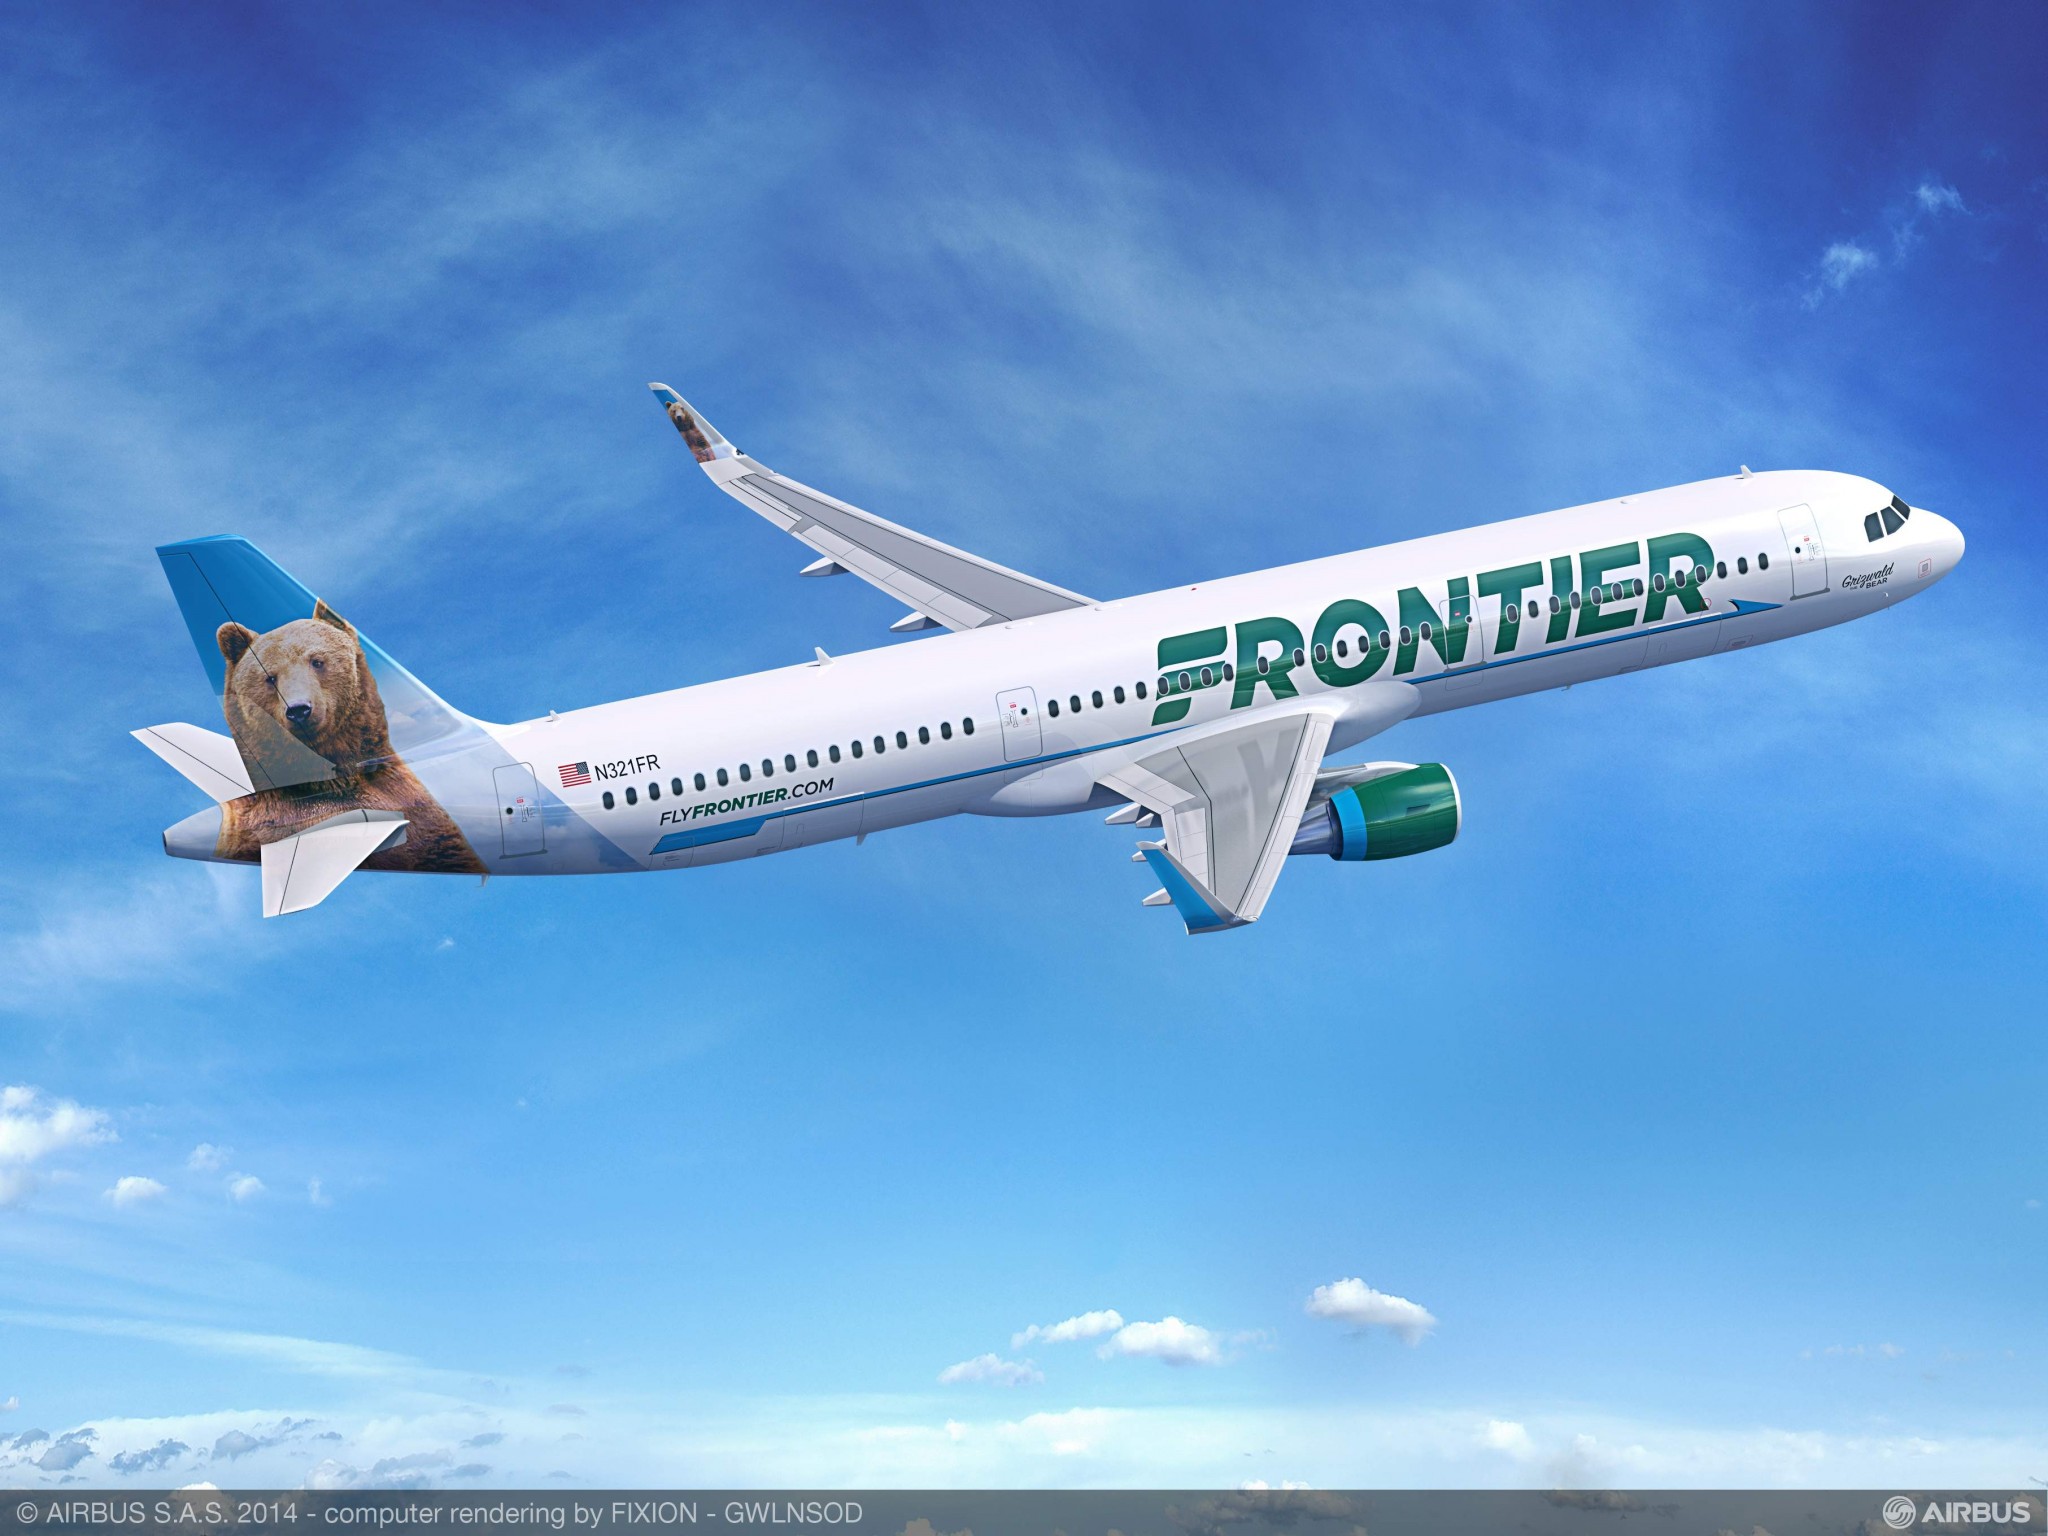 Frontier Airlines poised for IPO, reports Bloomberg